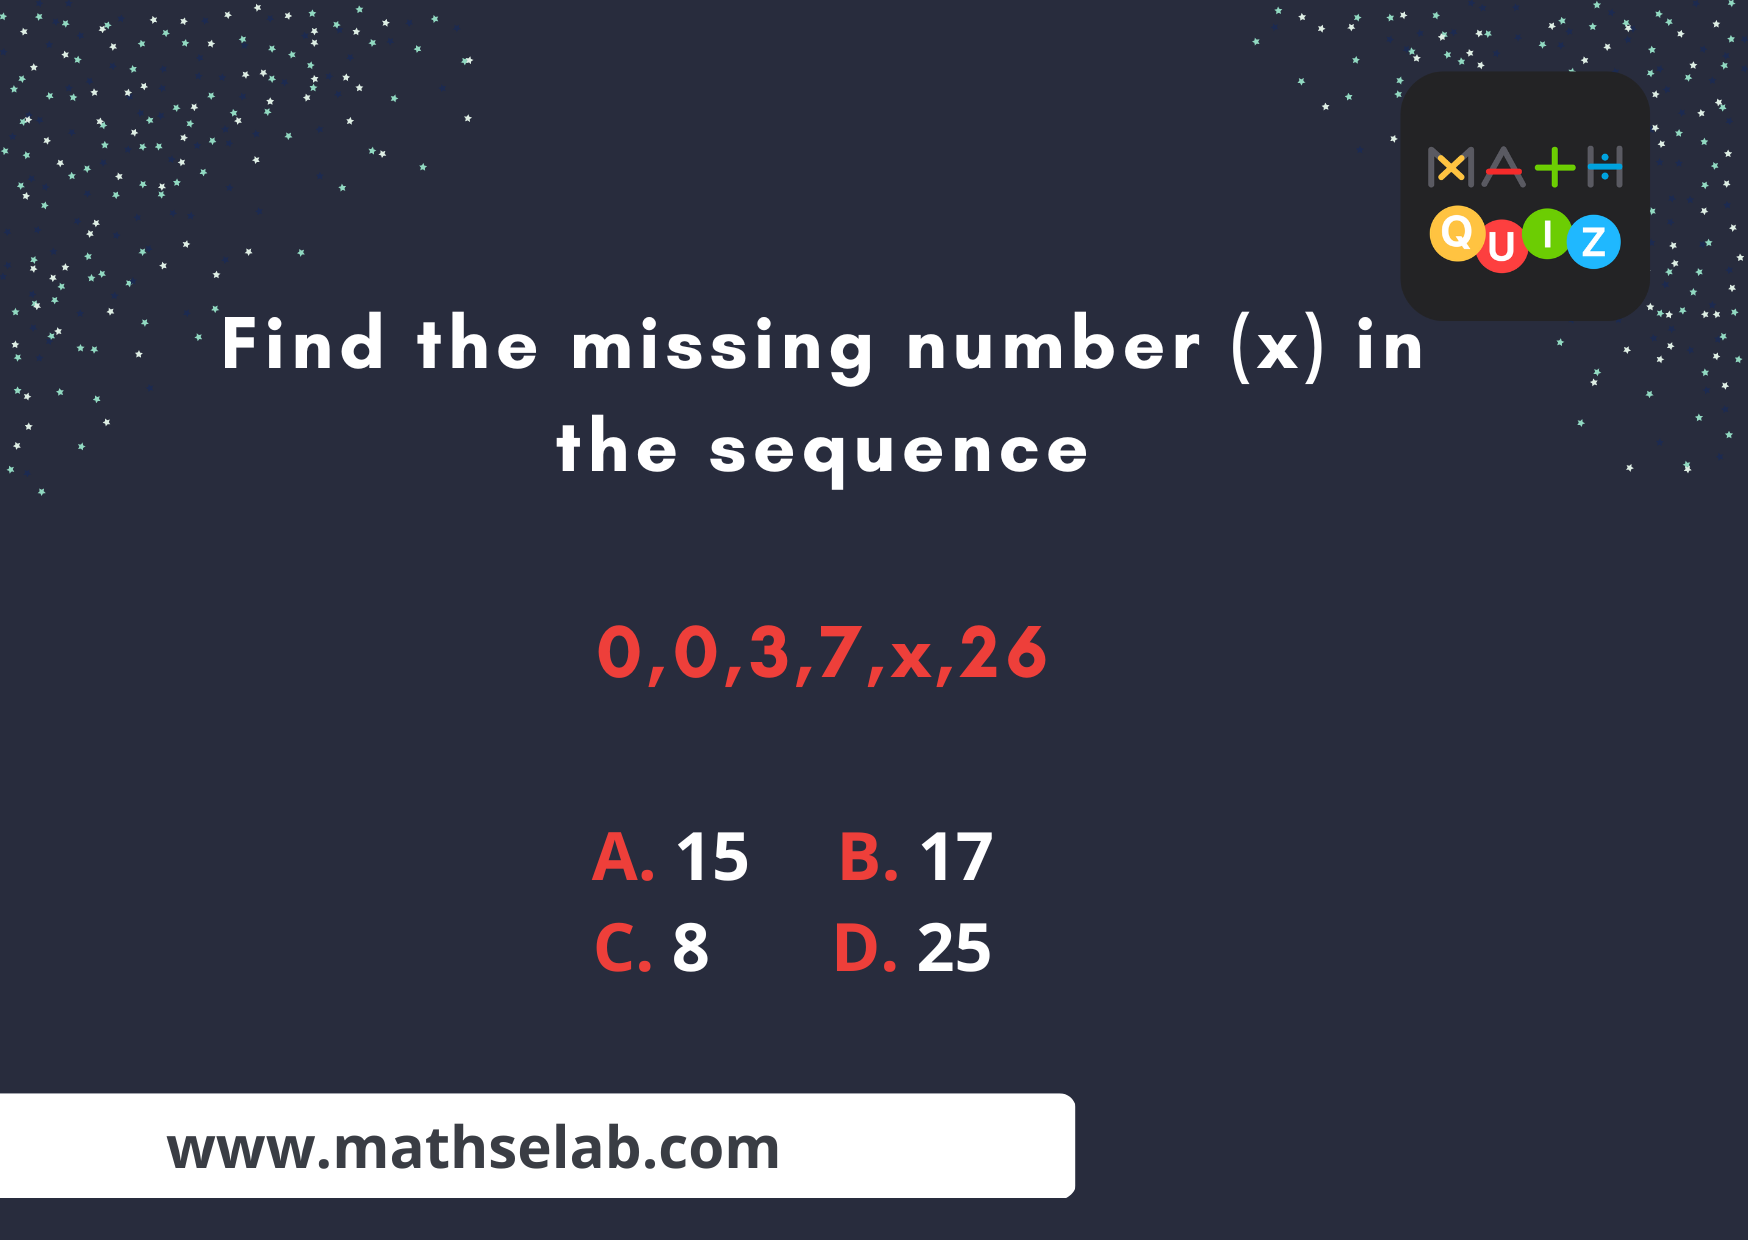 Find the missing number (x) in the sequence 0,0,3,7,x,26 - www.mathselab.com